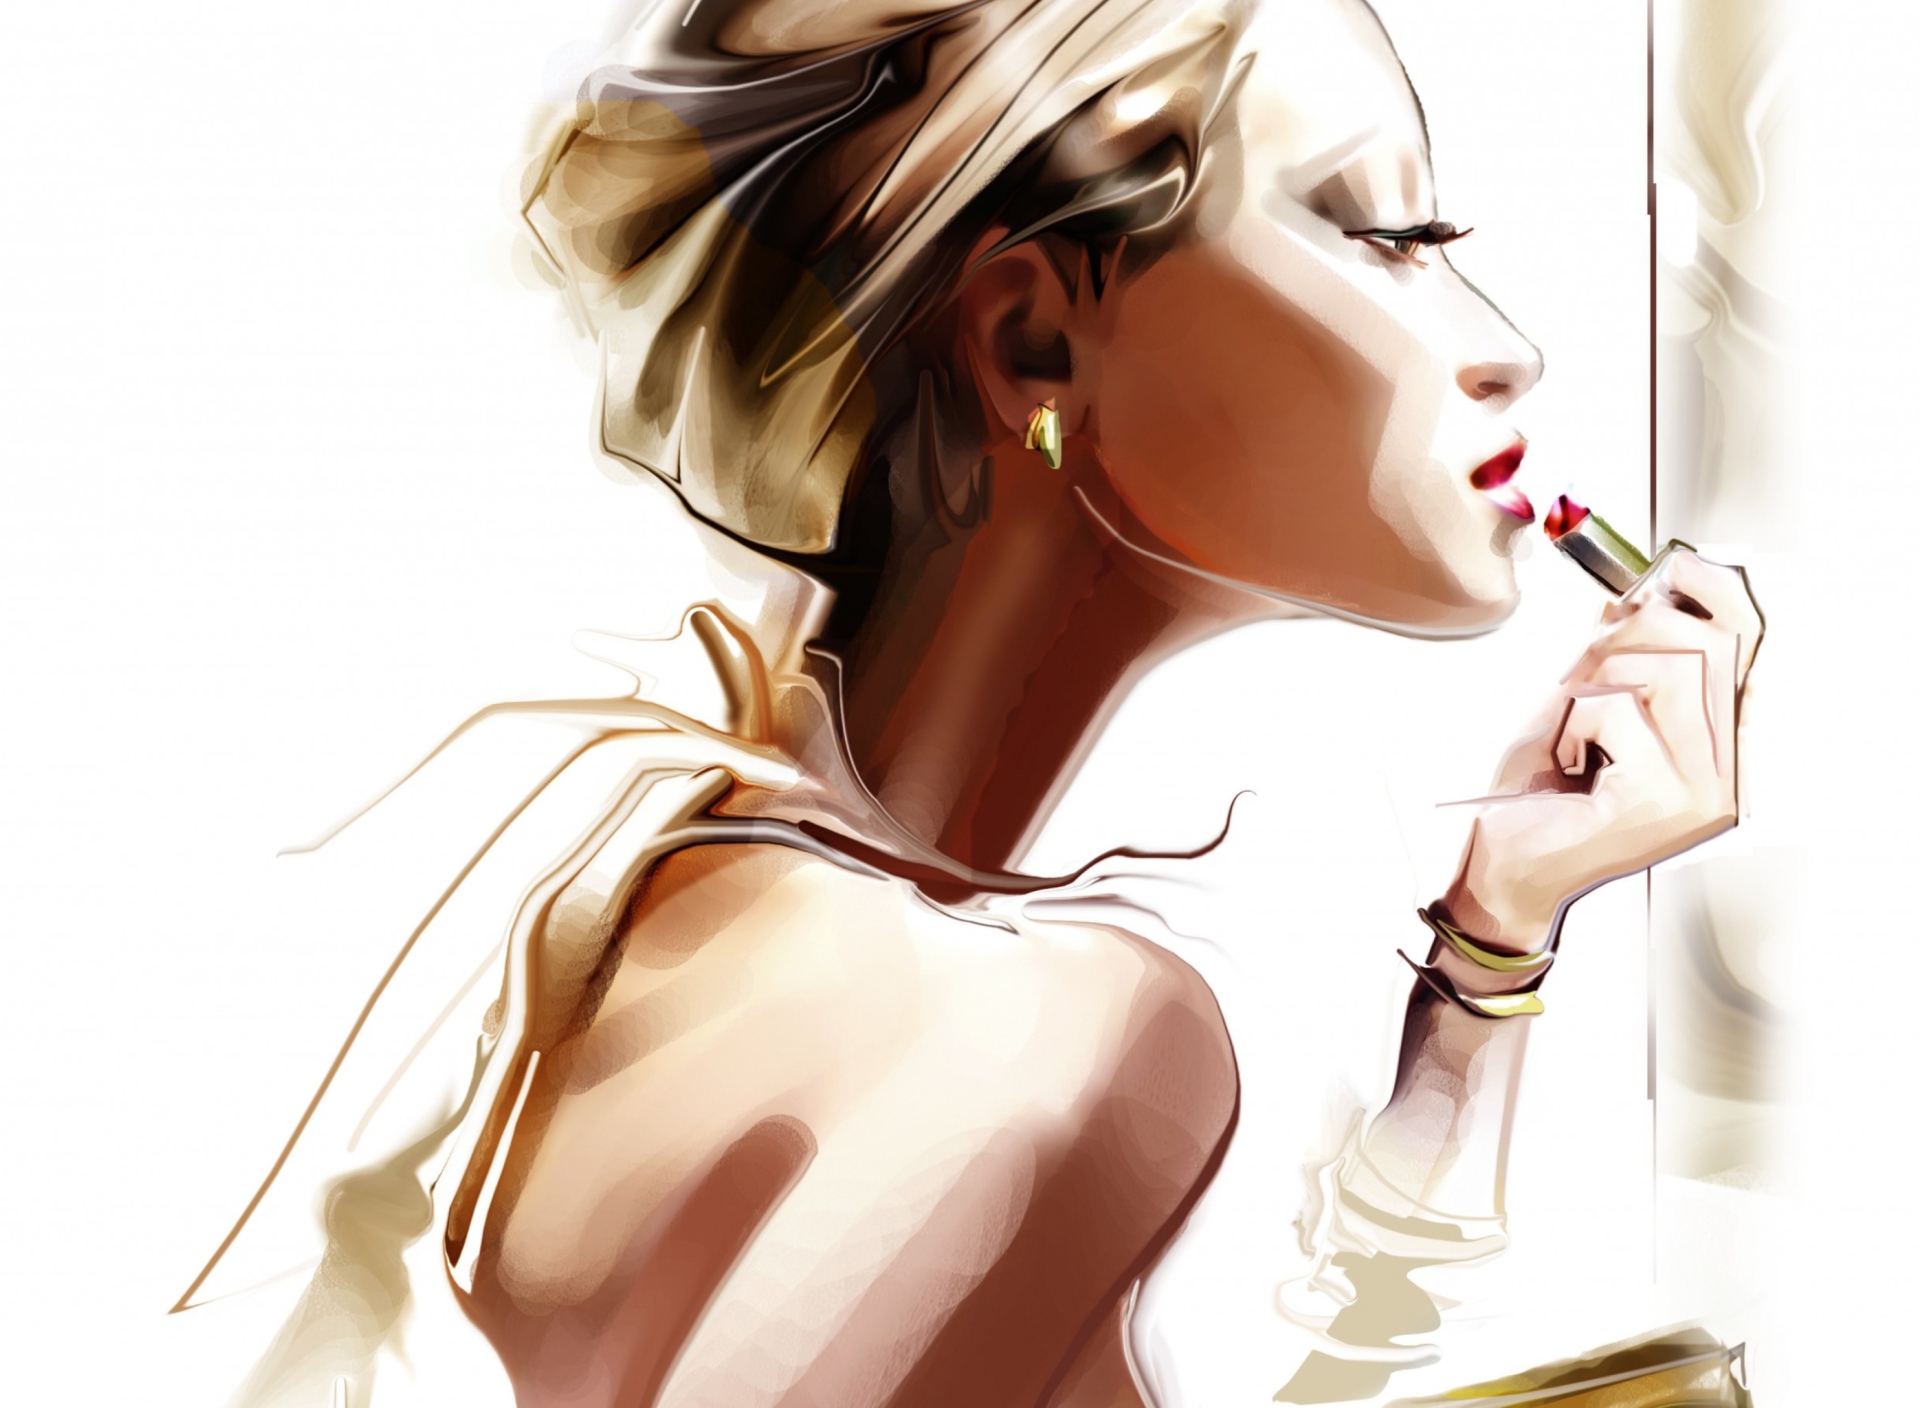 Girl With Red Lipstick Drawing screenshot #1 1920x1408